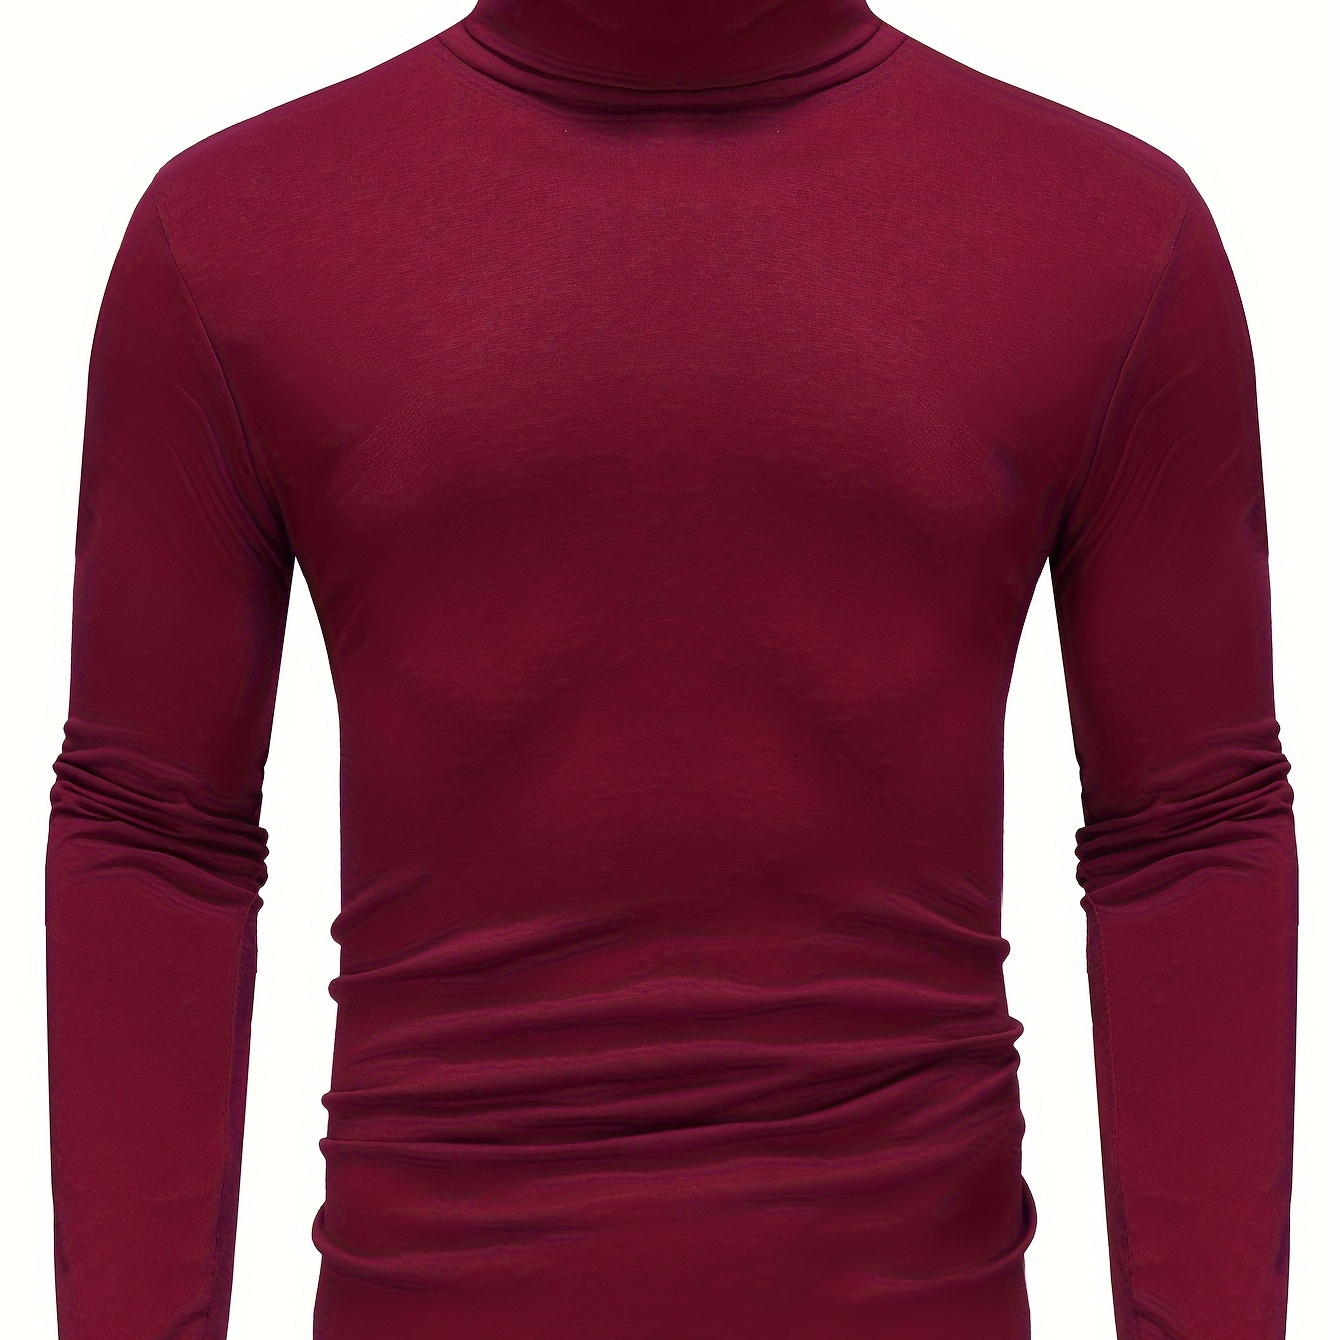 

Bottoming Shirt, Men's High Neck Long Sleeve Tops, Casual Plain Color Warm Base Layer Underwear Tops